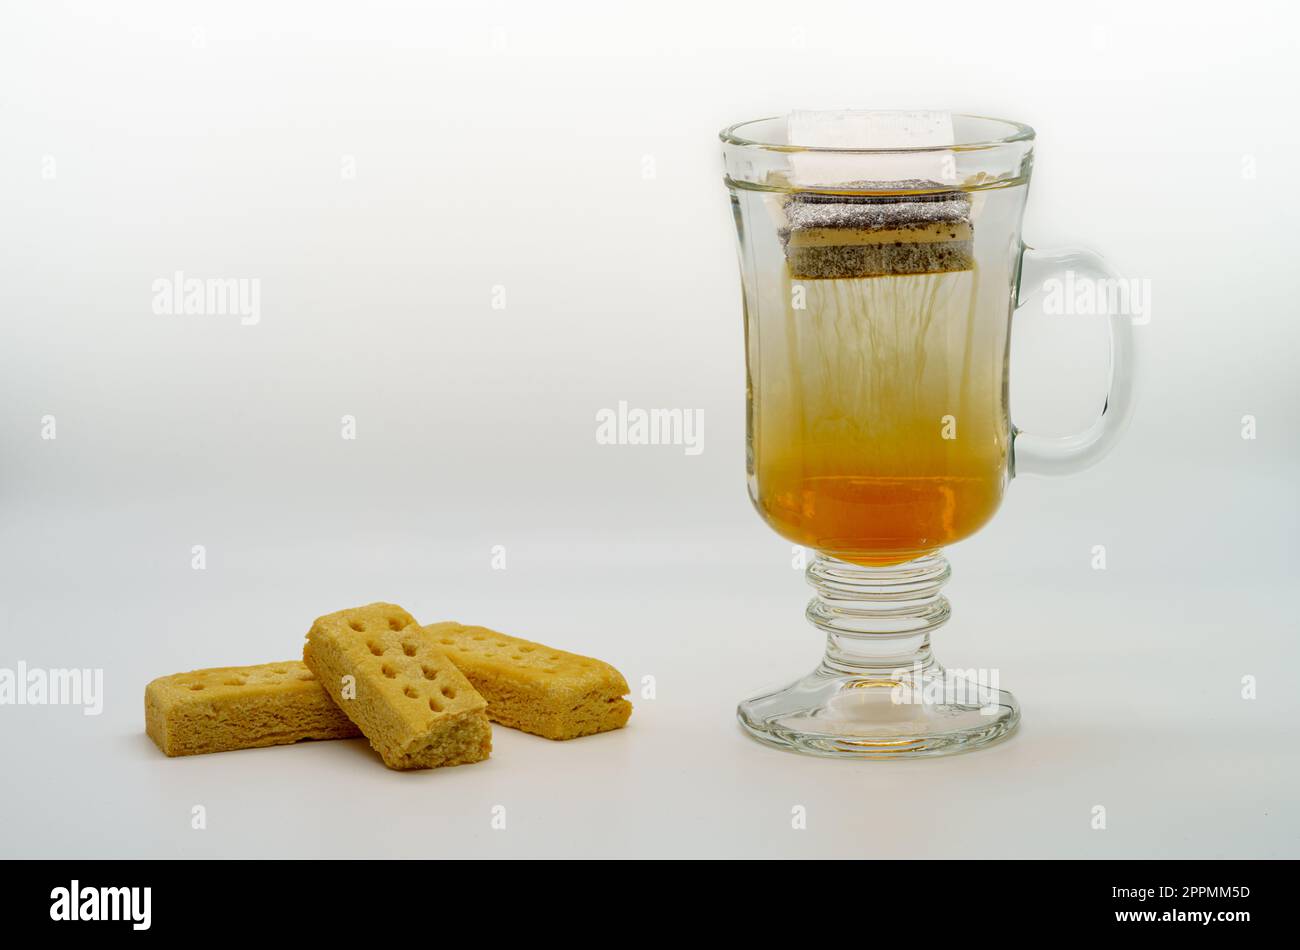 Hot tea steeping in a clear mug showing strings of tea essence infusing the water with the wonderful flavor of the leaves, accompanied by shortbreads Stock Photo